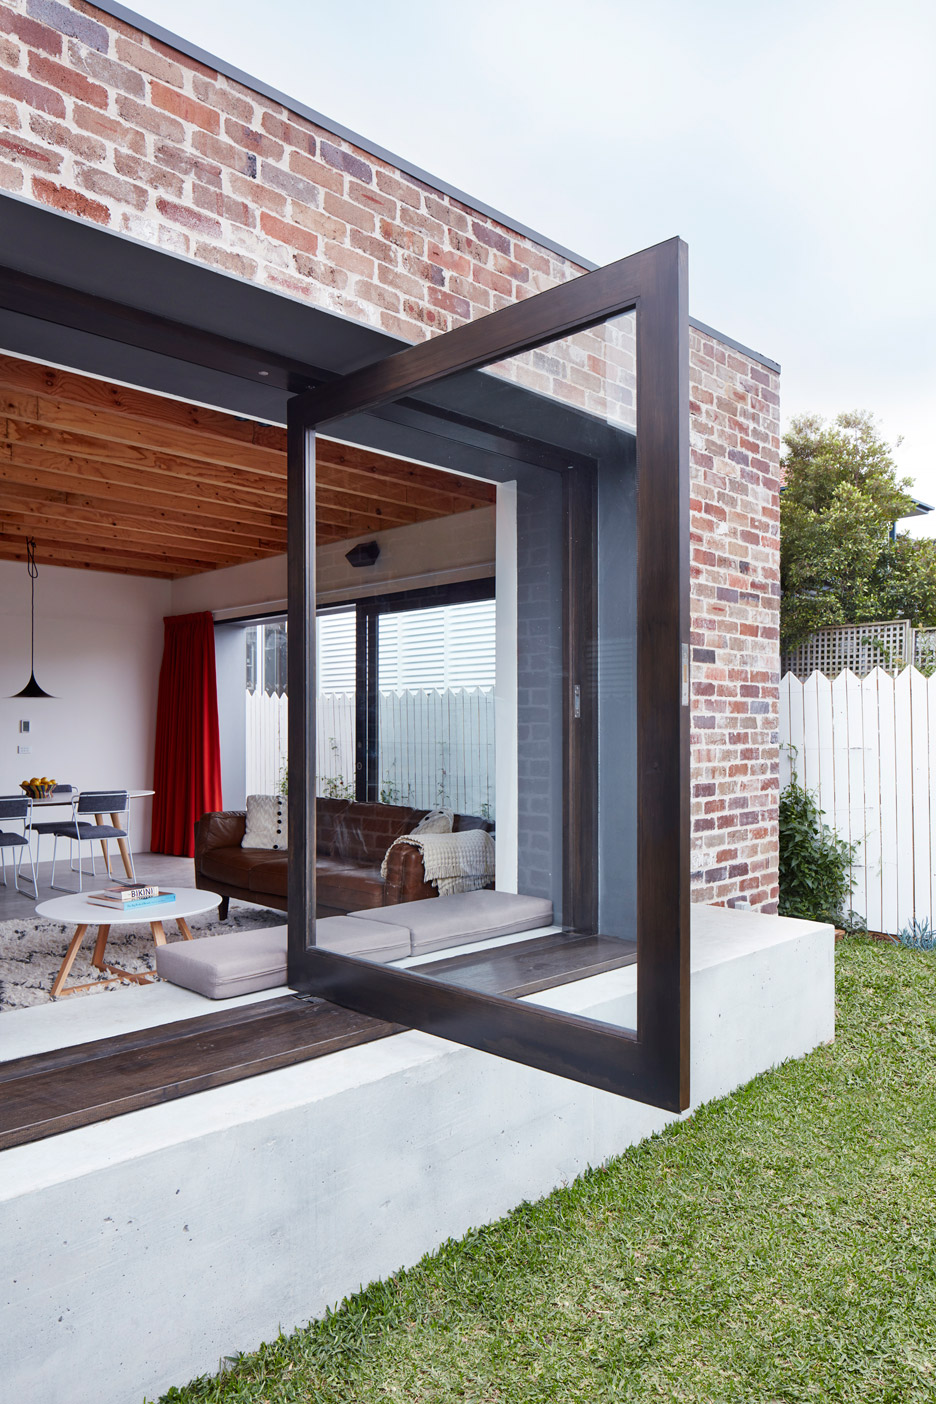 Maroubra House by THOSE Architects